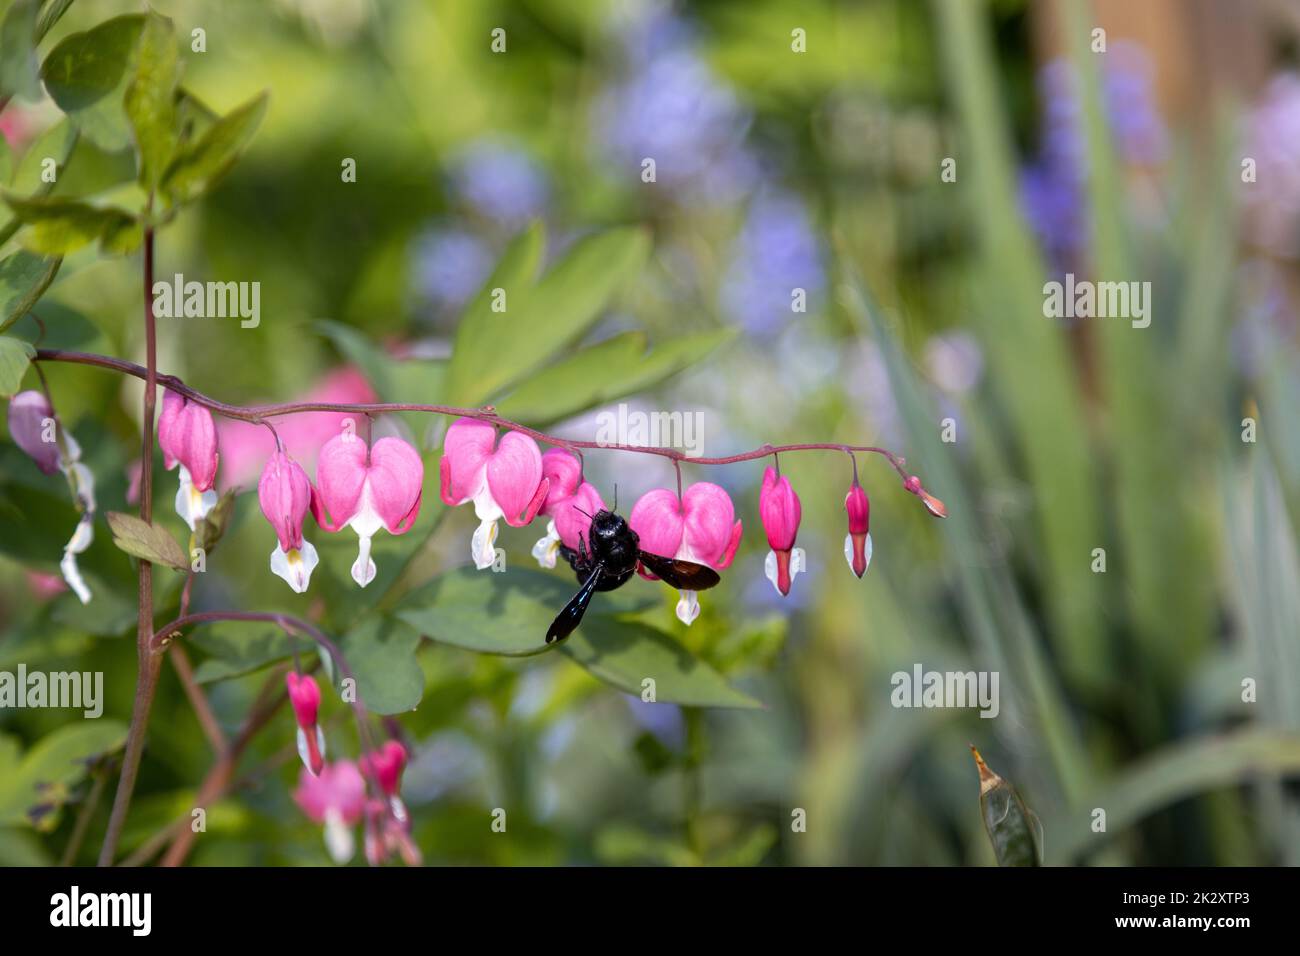 A blue wood bee searches for pollen on a heart flower,Lamprocapnos spectabilis. Stock Photo